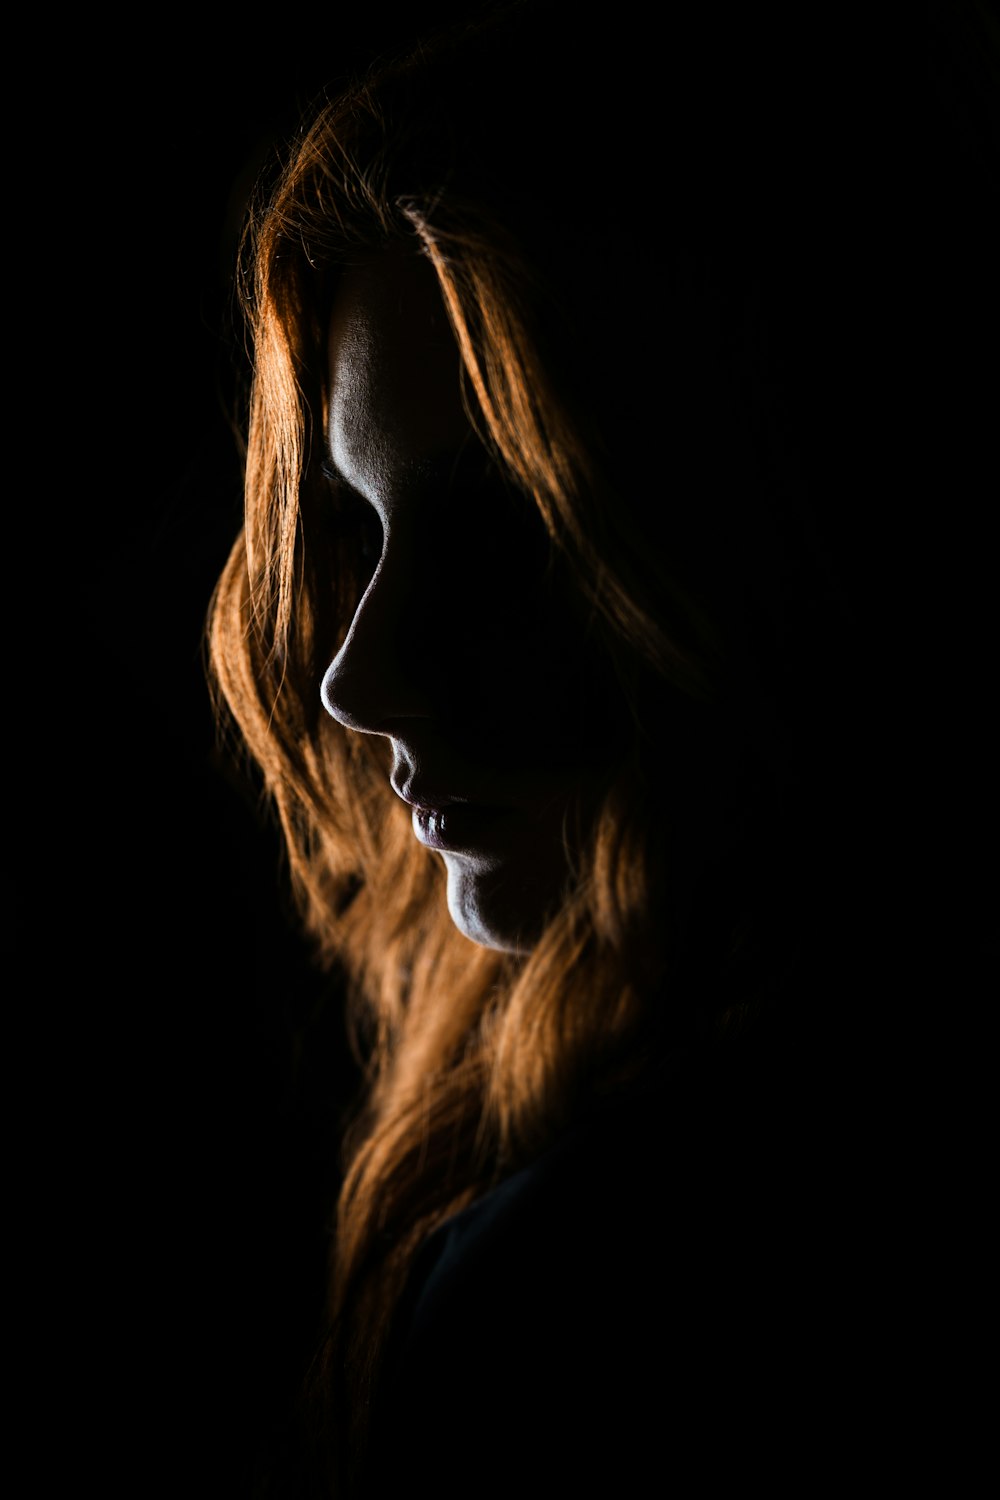 Shadow Girl Pictures | Download Free Images on Unsplash